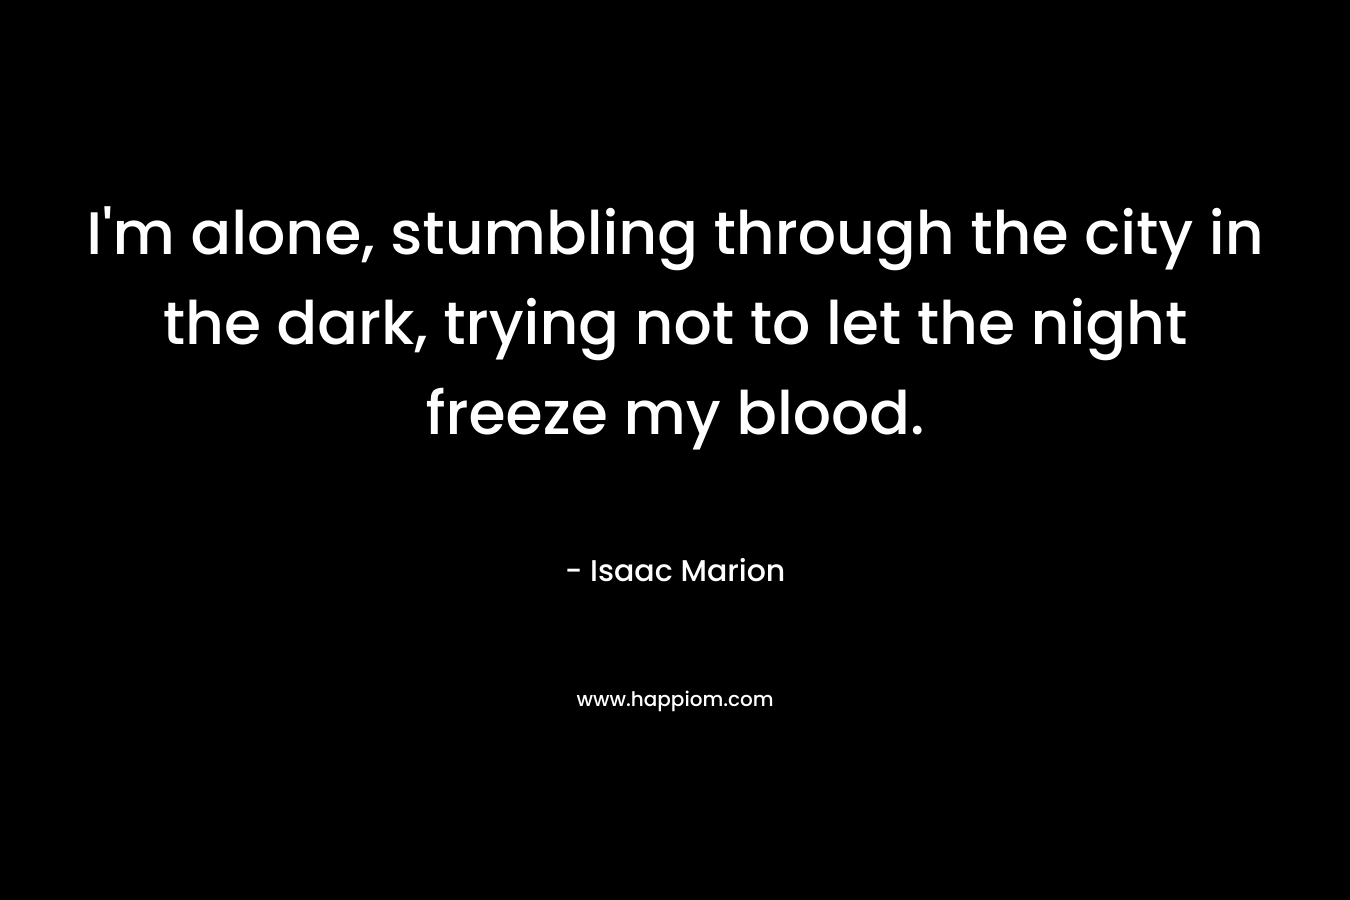 I’m alone, stumbling through the city in the dark, trying not to let the night freeze my blood. – Isaac Marion